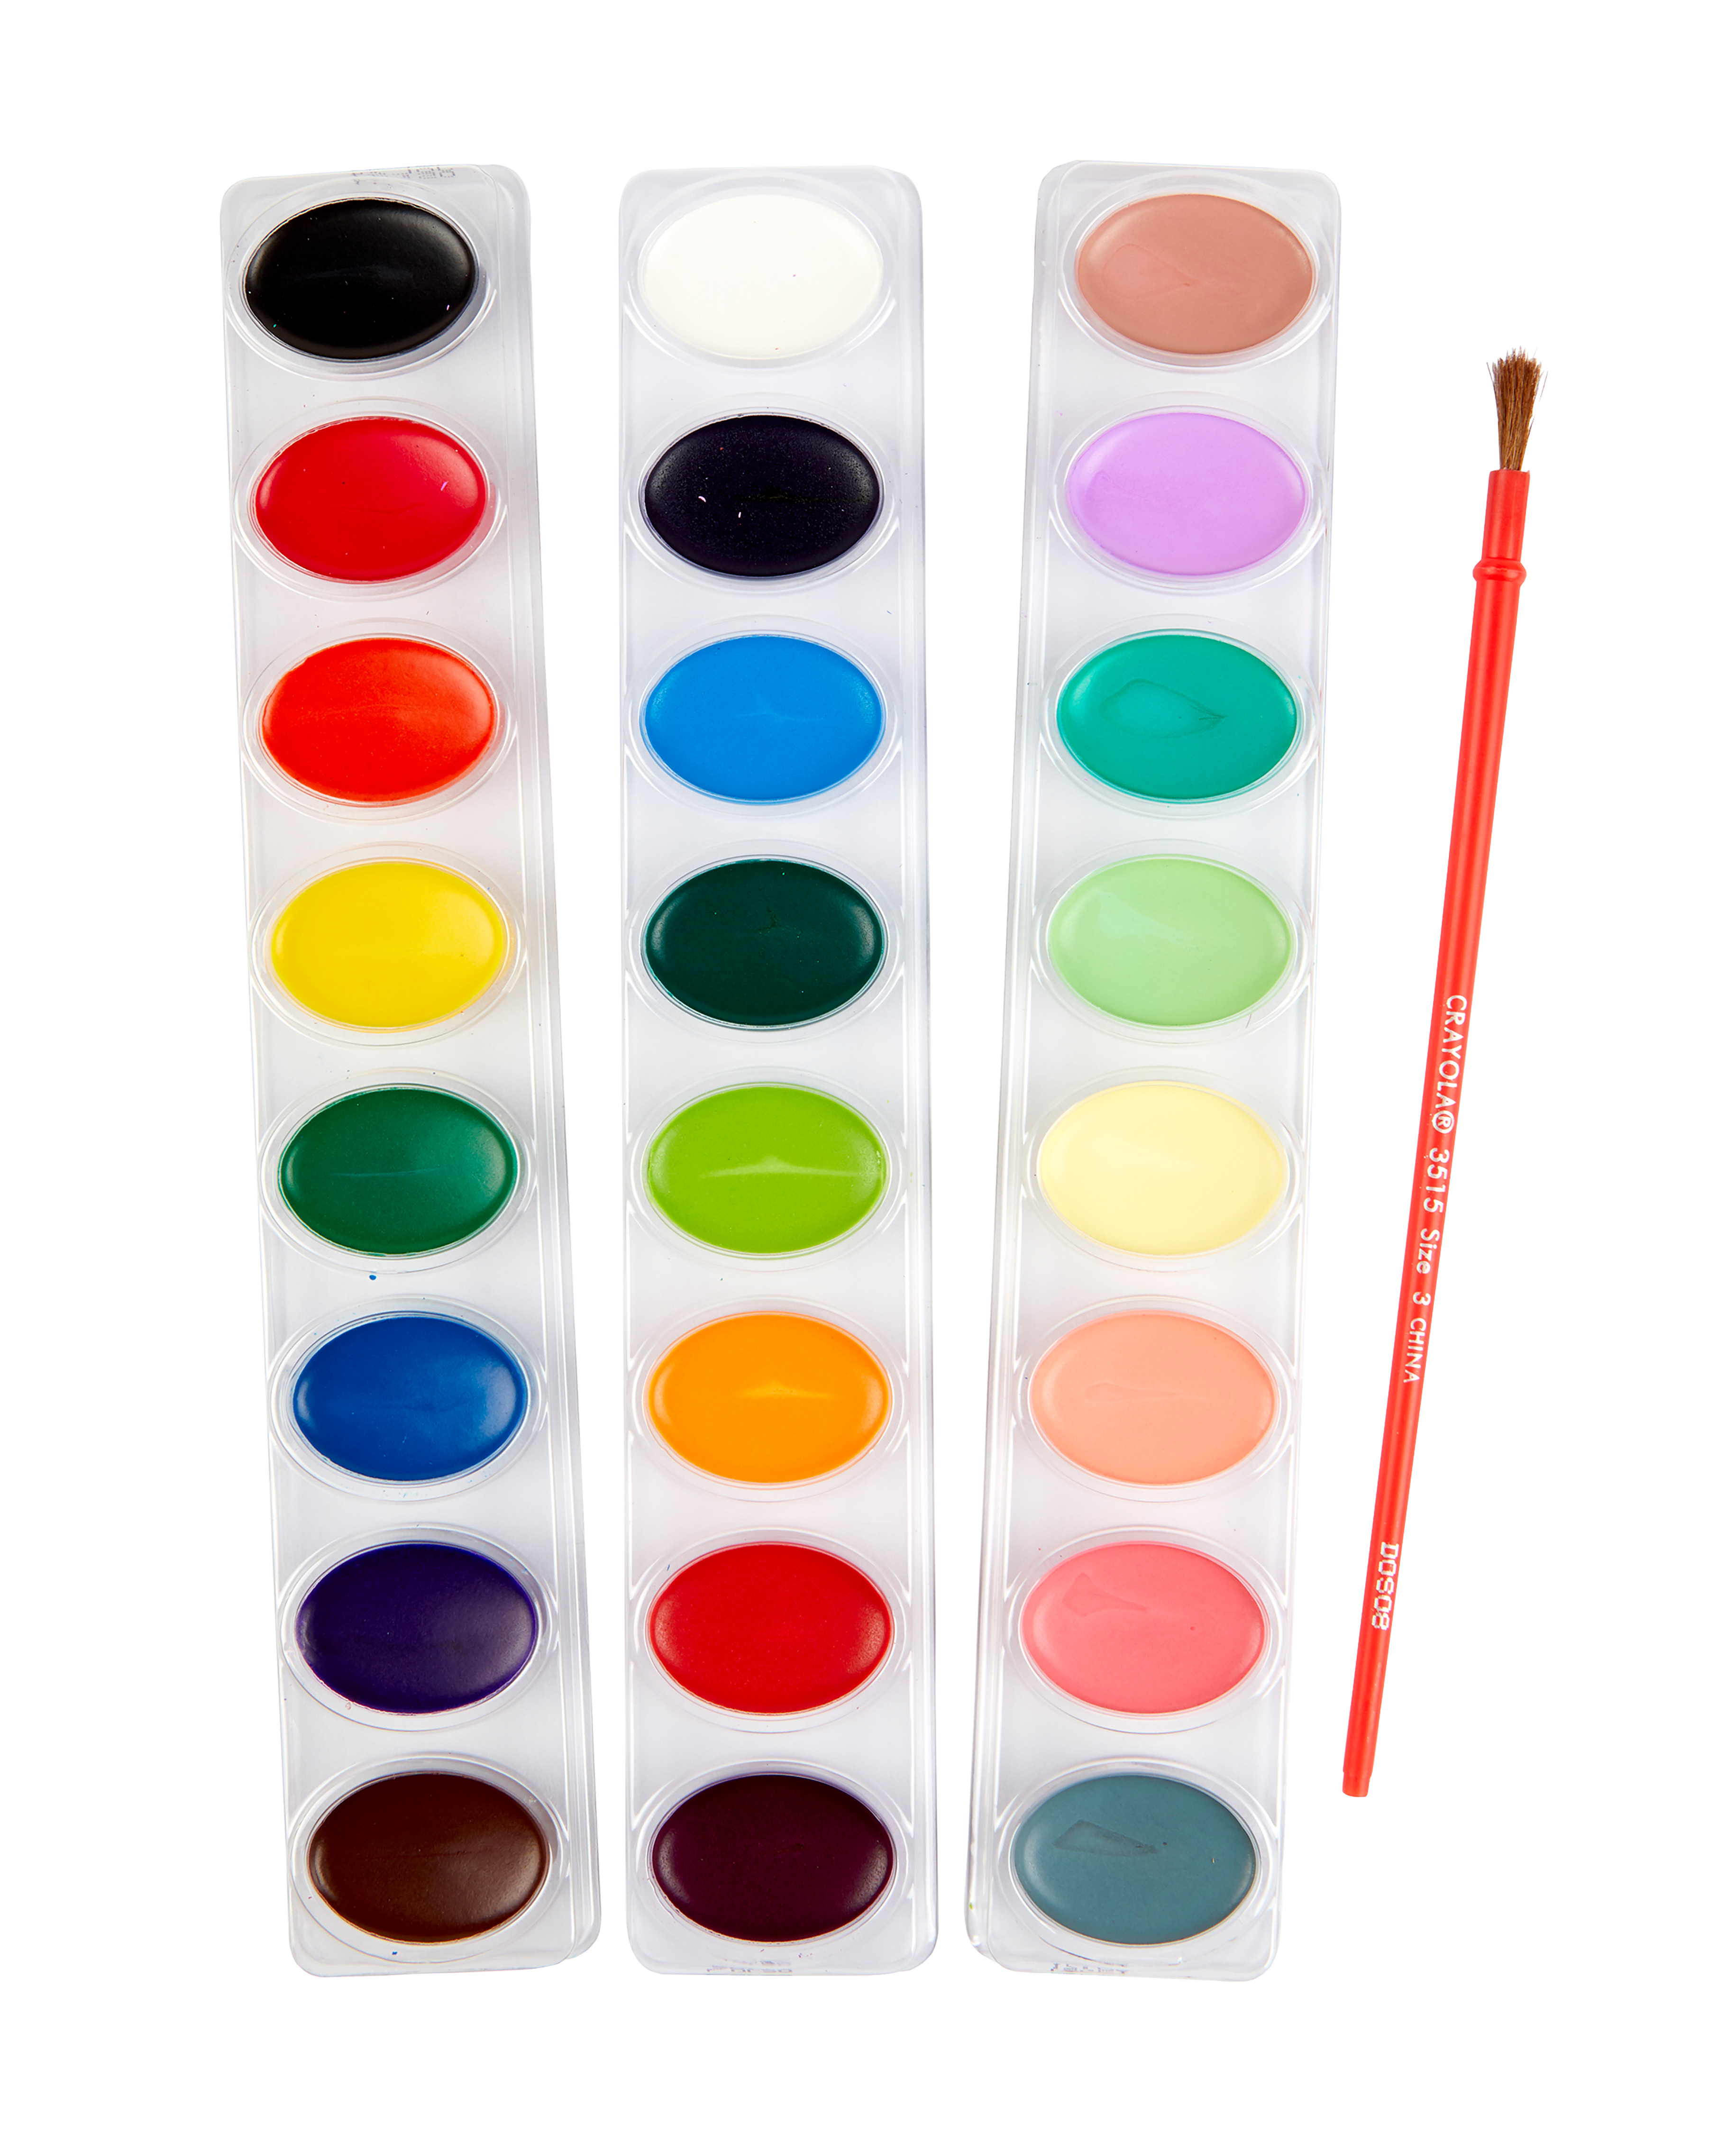 Crayola 24ct Watercolor Paints with Brush - image 8 of 8